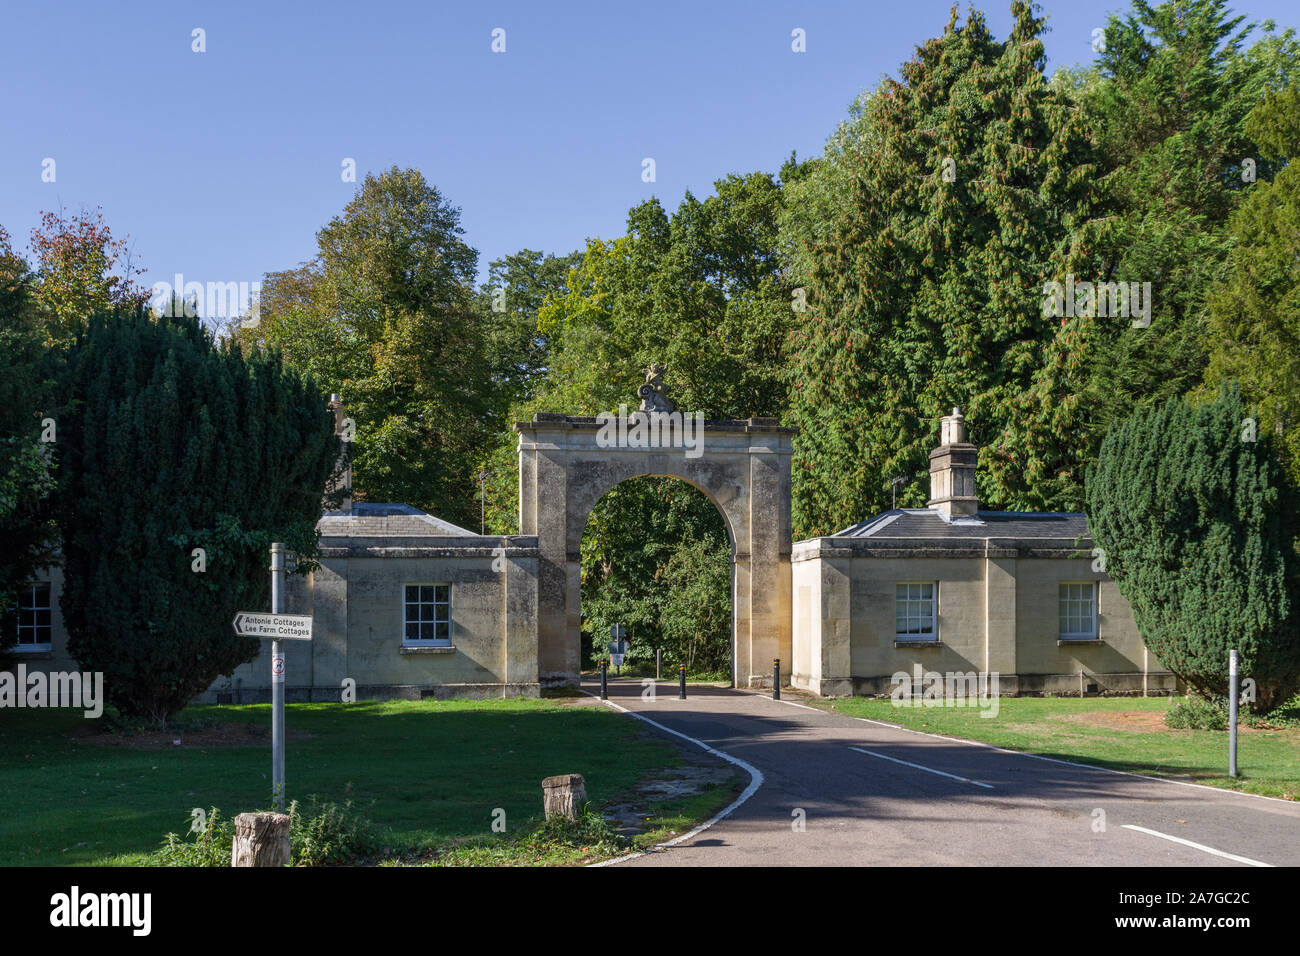 Pair of 18th century gatehouses joined by an arch at the entrance to Colworth House, Sharnbrook, Bedfordshire, UK Stock Photo